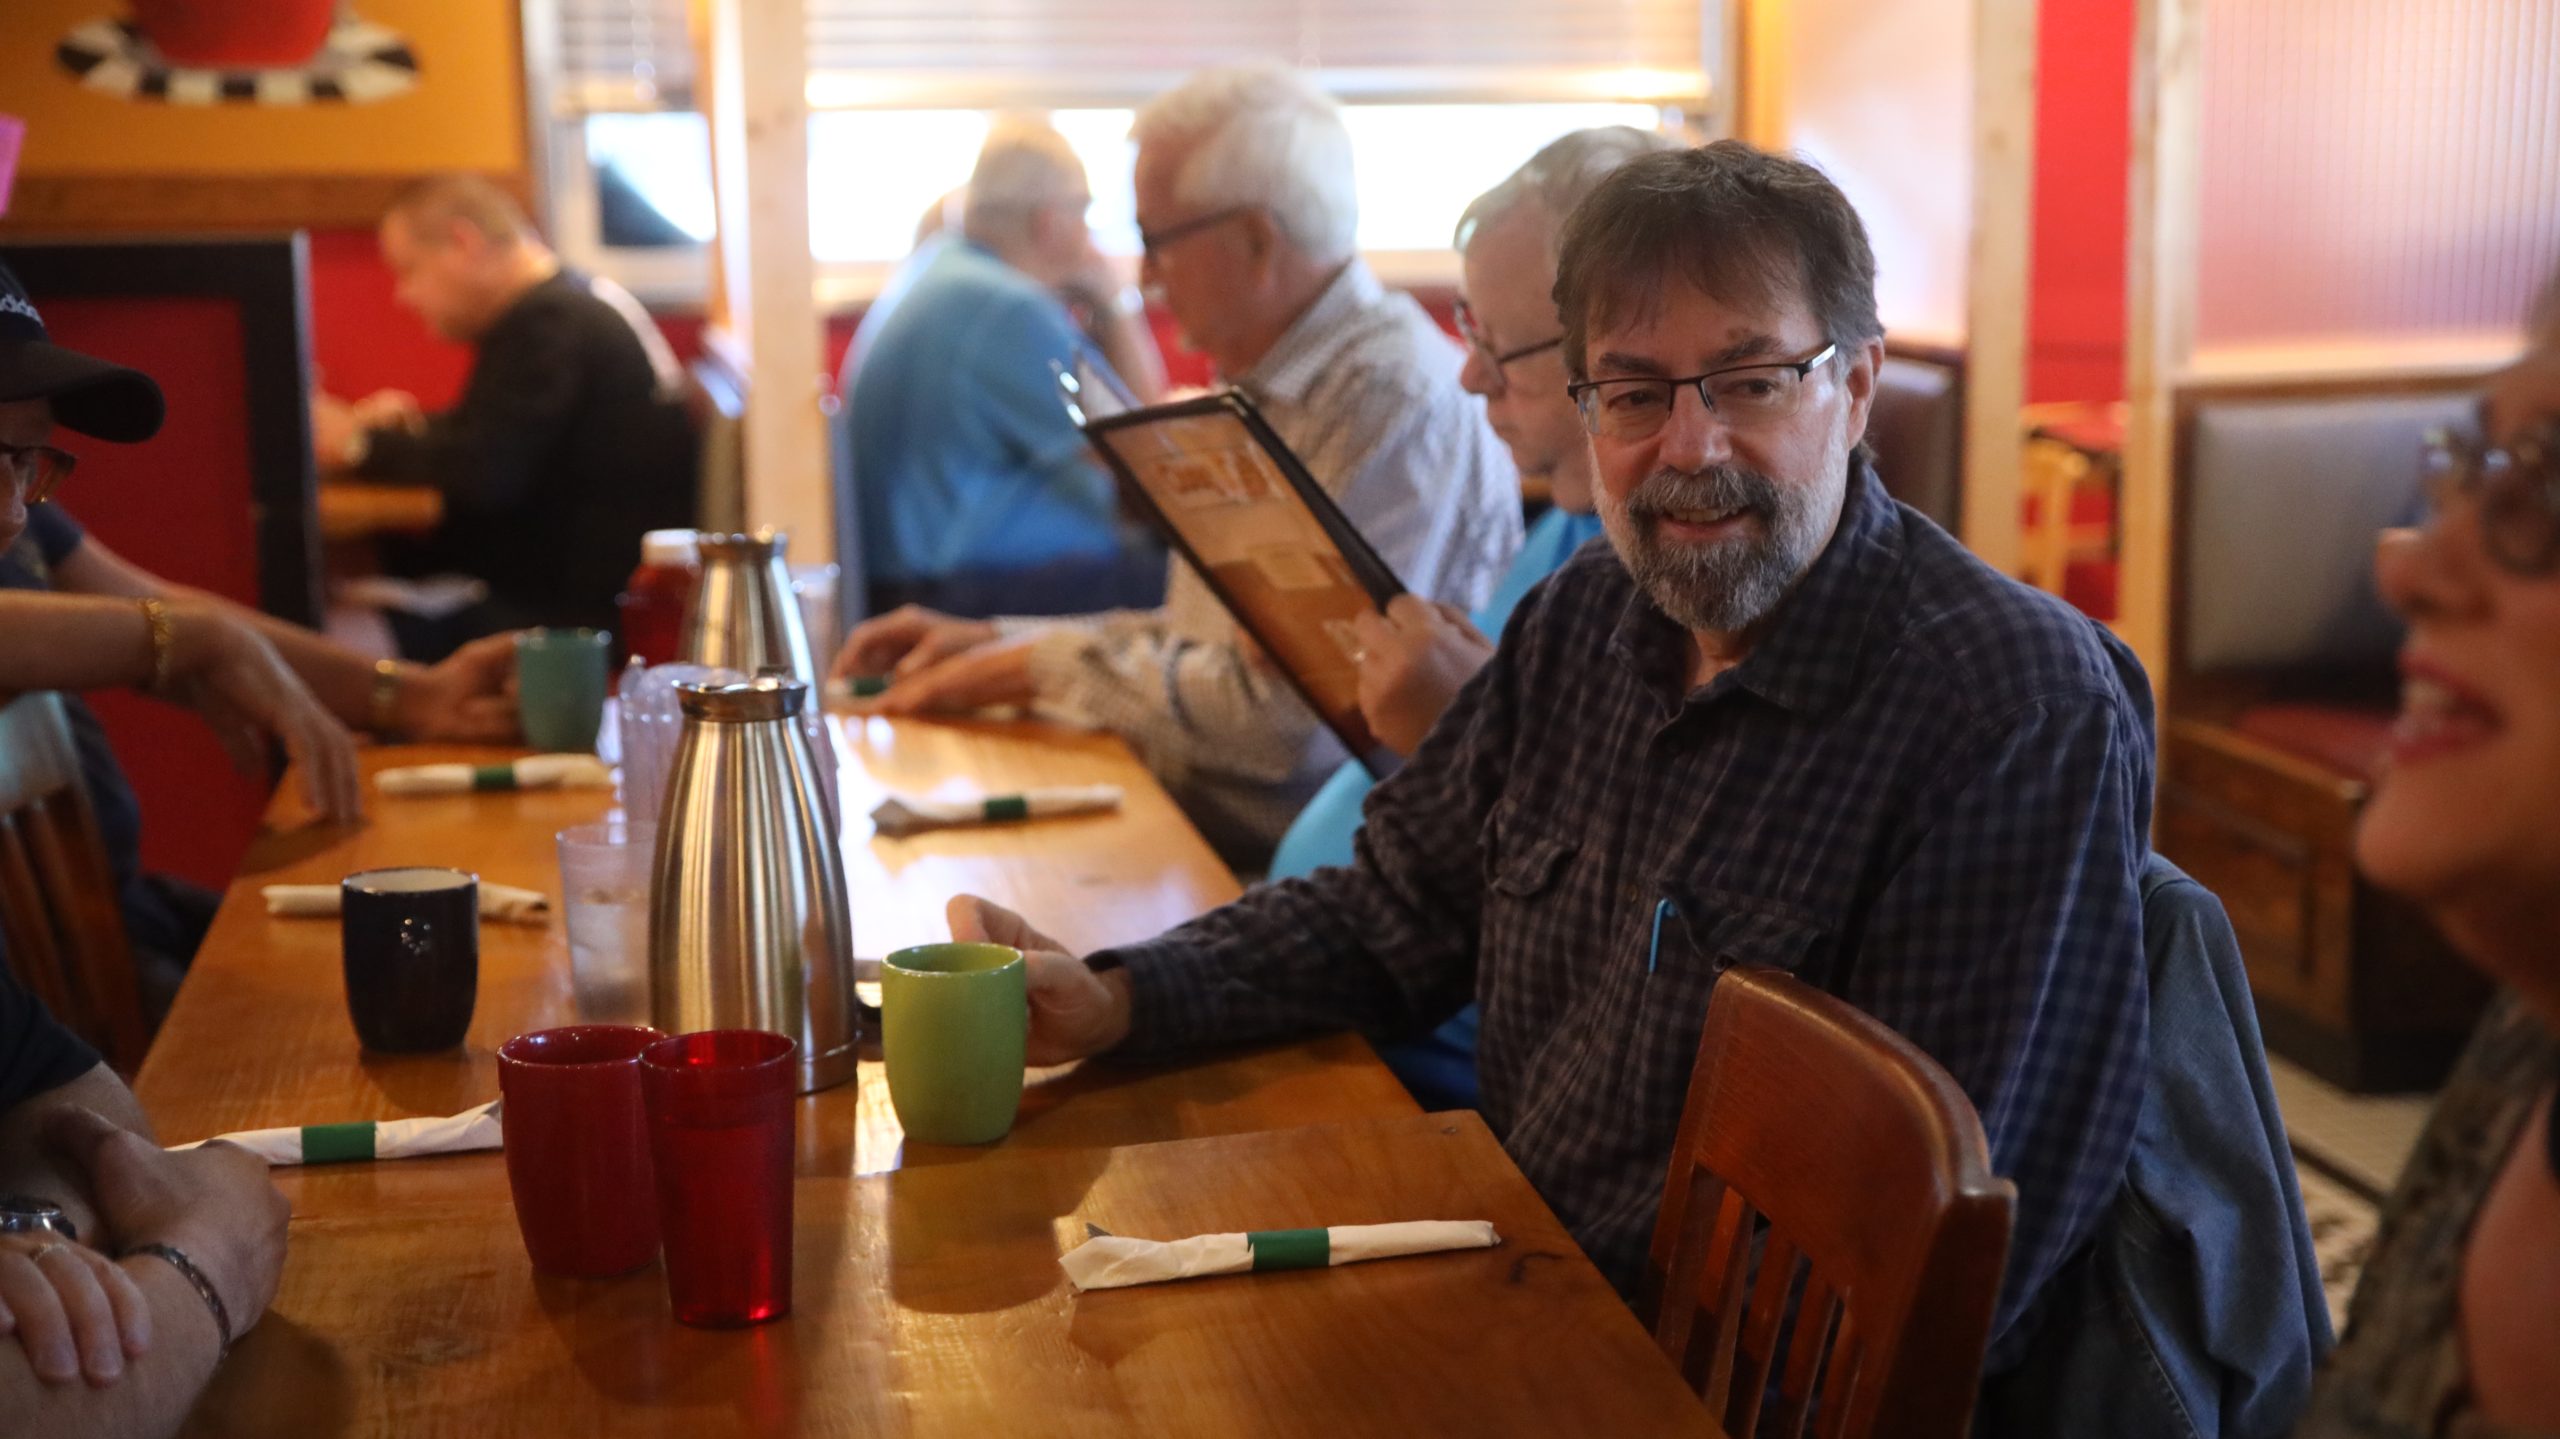 Member of our 50+ ministry spending time in fellowship and community at a local cafe